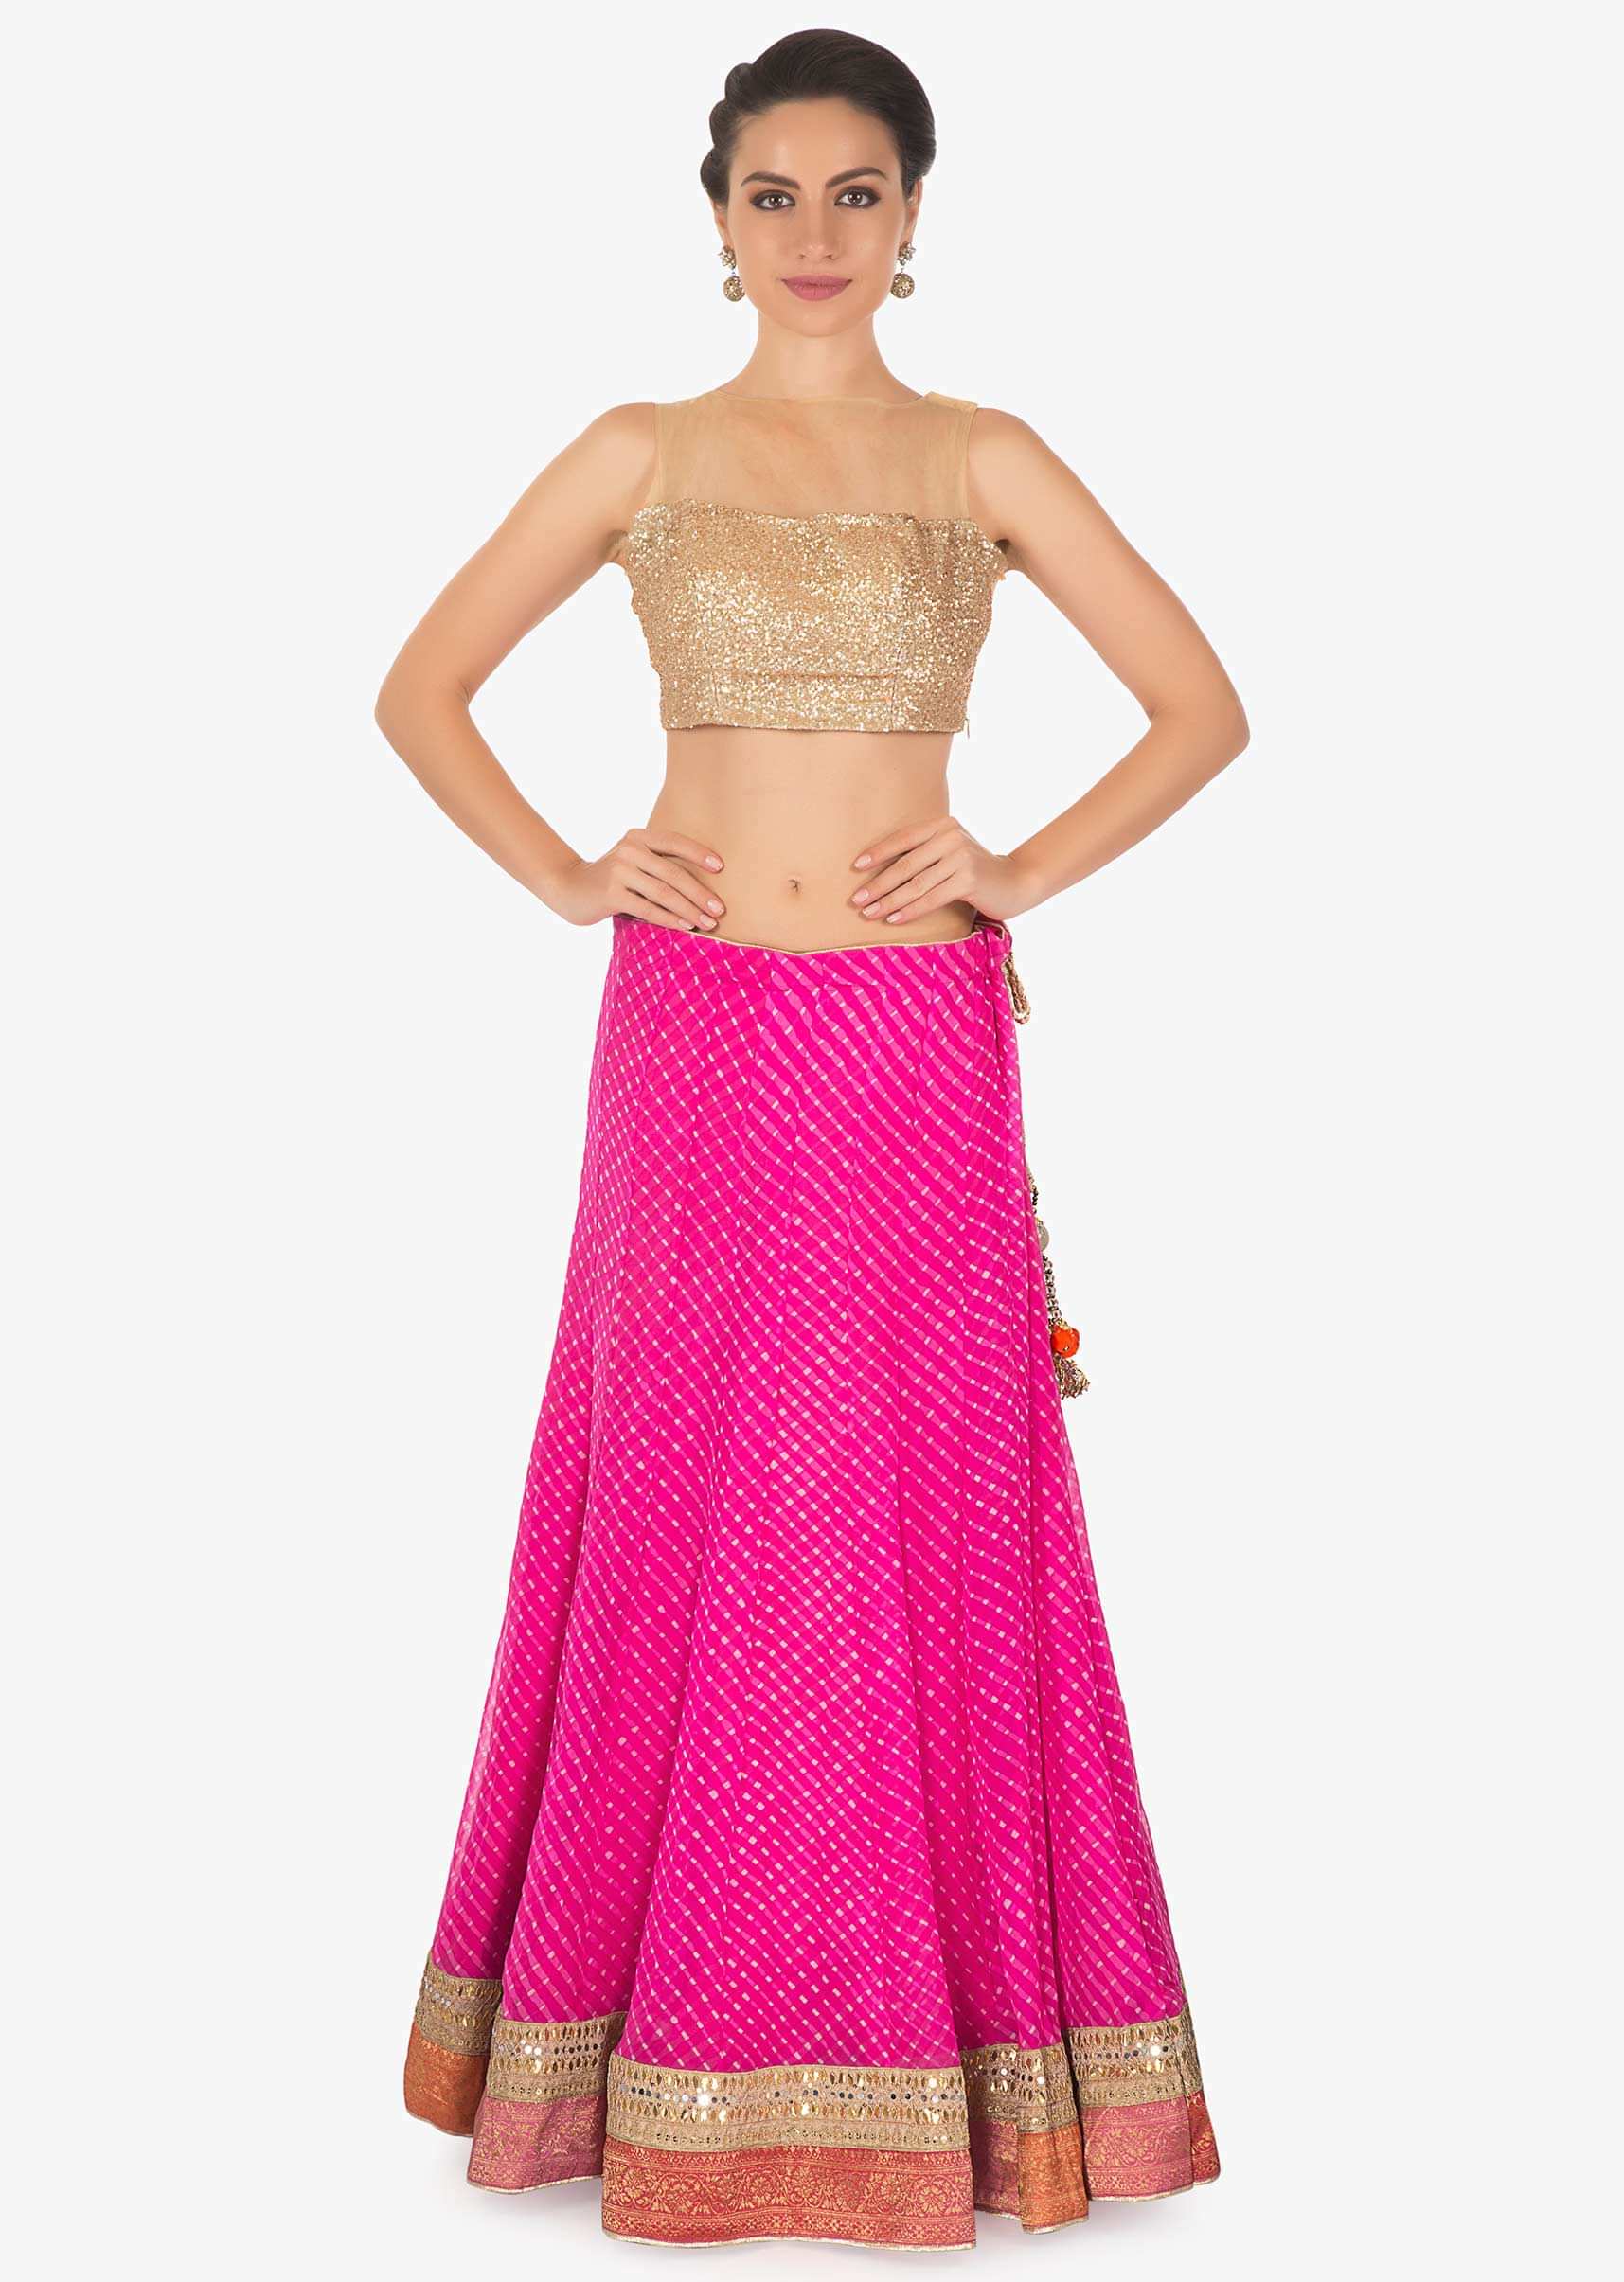 Pink leherie georgette lehenga matched with shaded brocade dupatta 